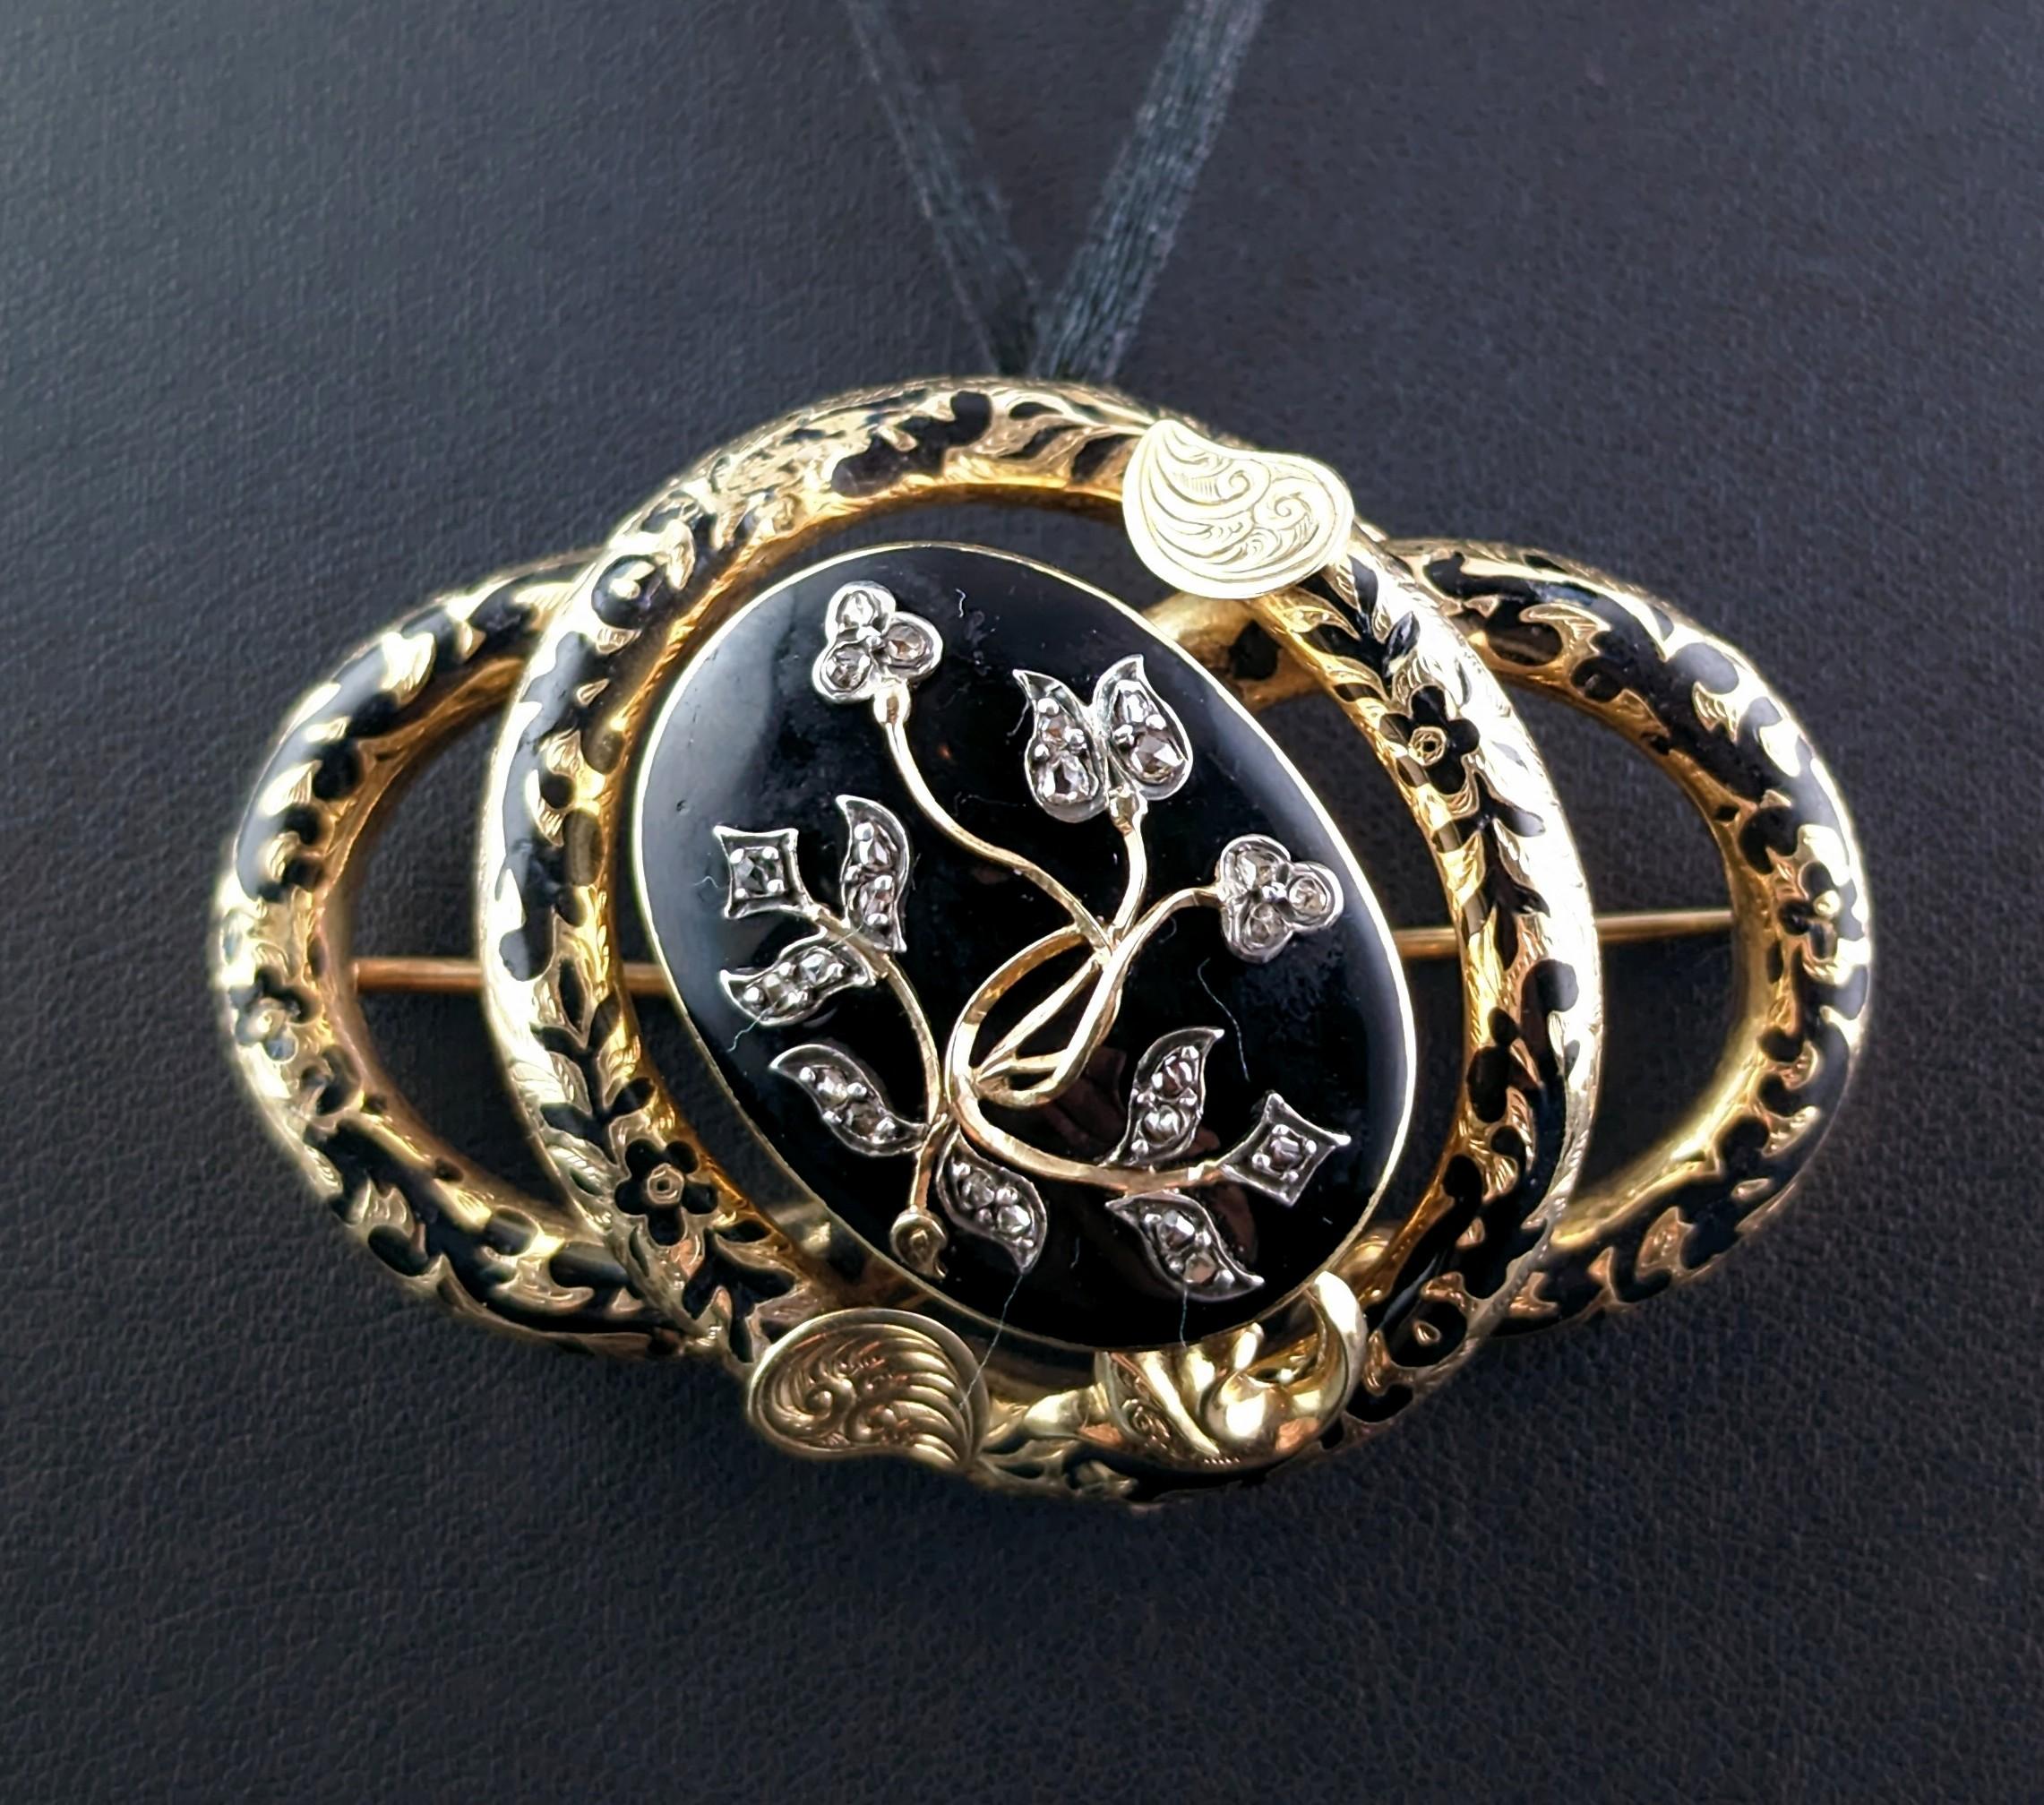 This is truly one of the most spectacular and beautiful antique mourning brooches of its design.

It is a very large sized brooch and can also be worn as a pendant, it is a knot form with engraved tendrils forming the knot shape, encompassing a